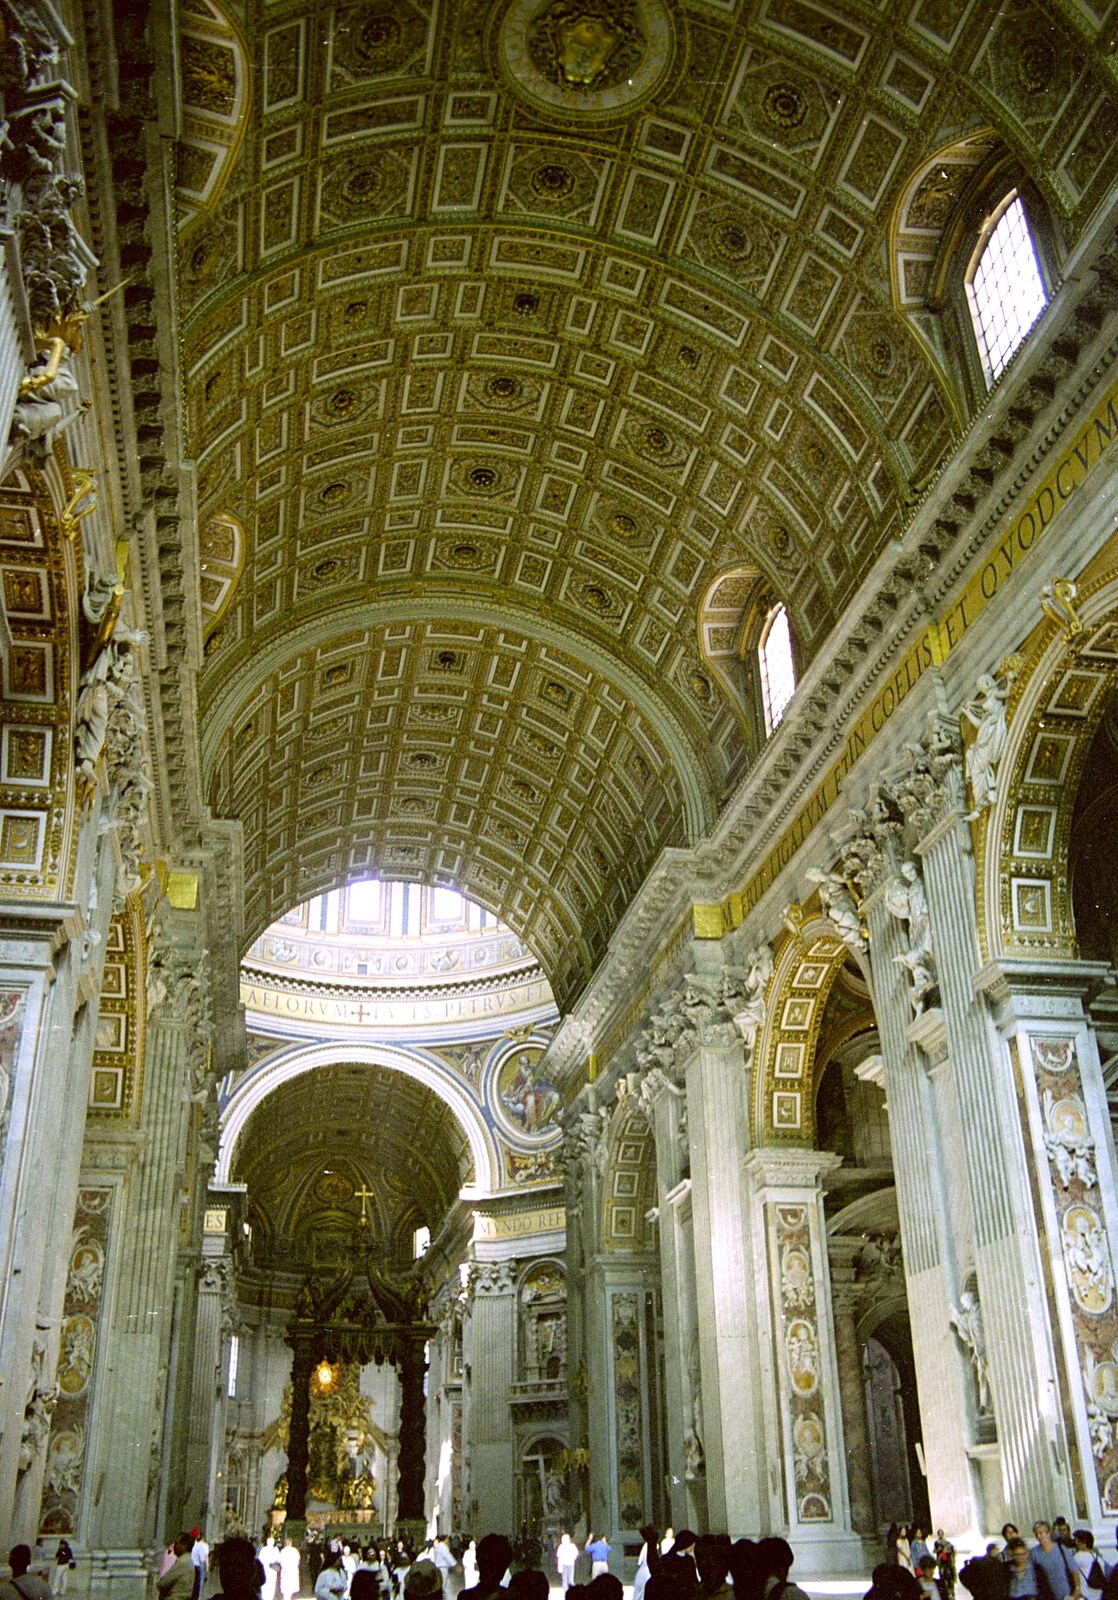 The nave of St Peter's from A Working Trip to Rome, Italy - 10th September 1999